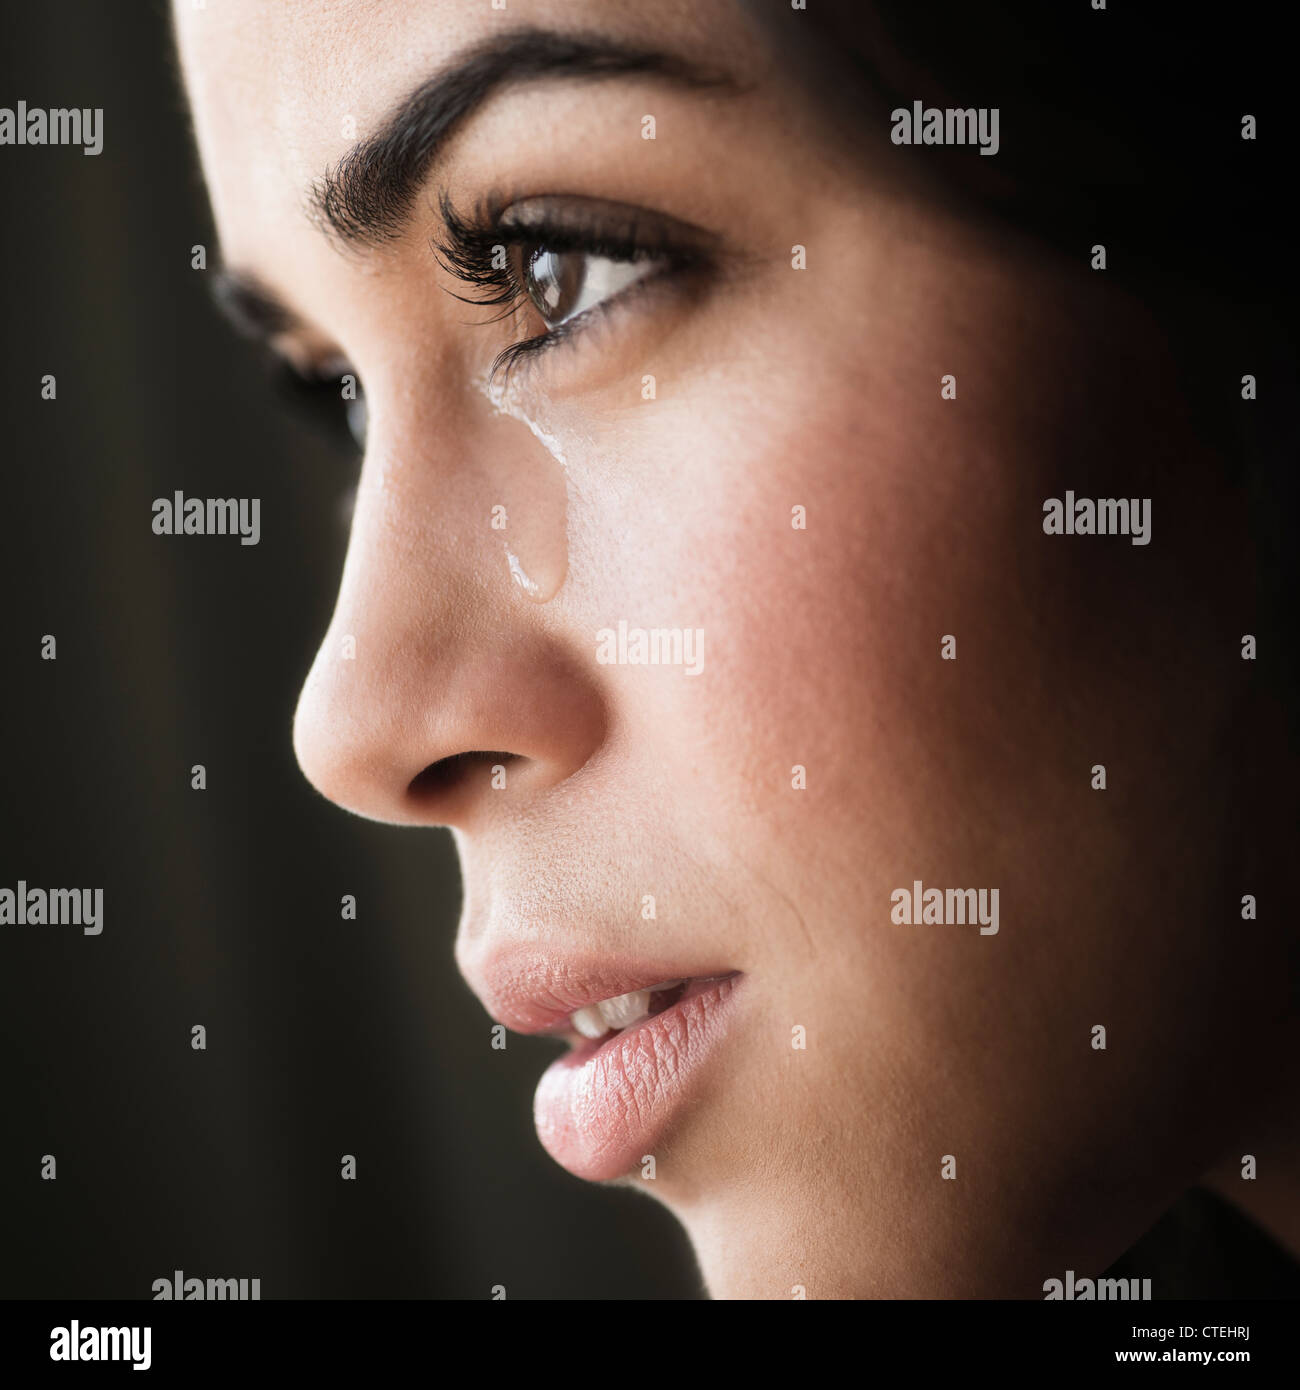 Close-up of young woman crying Stock Photo